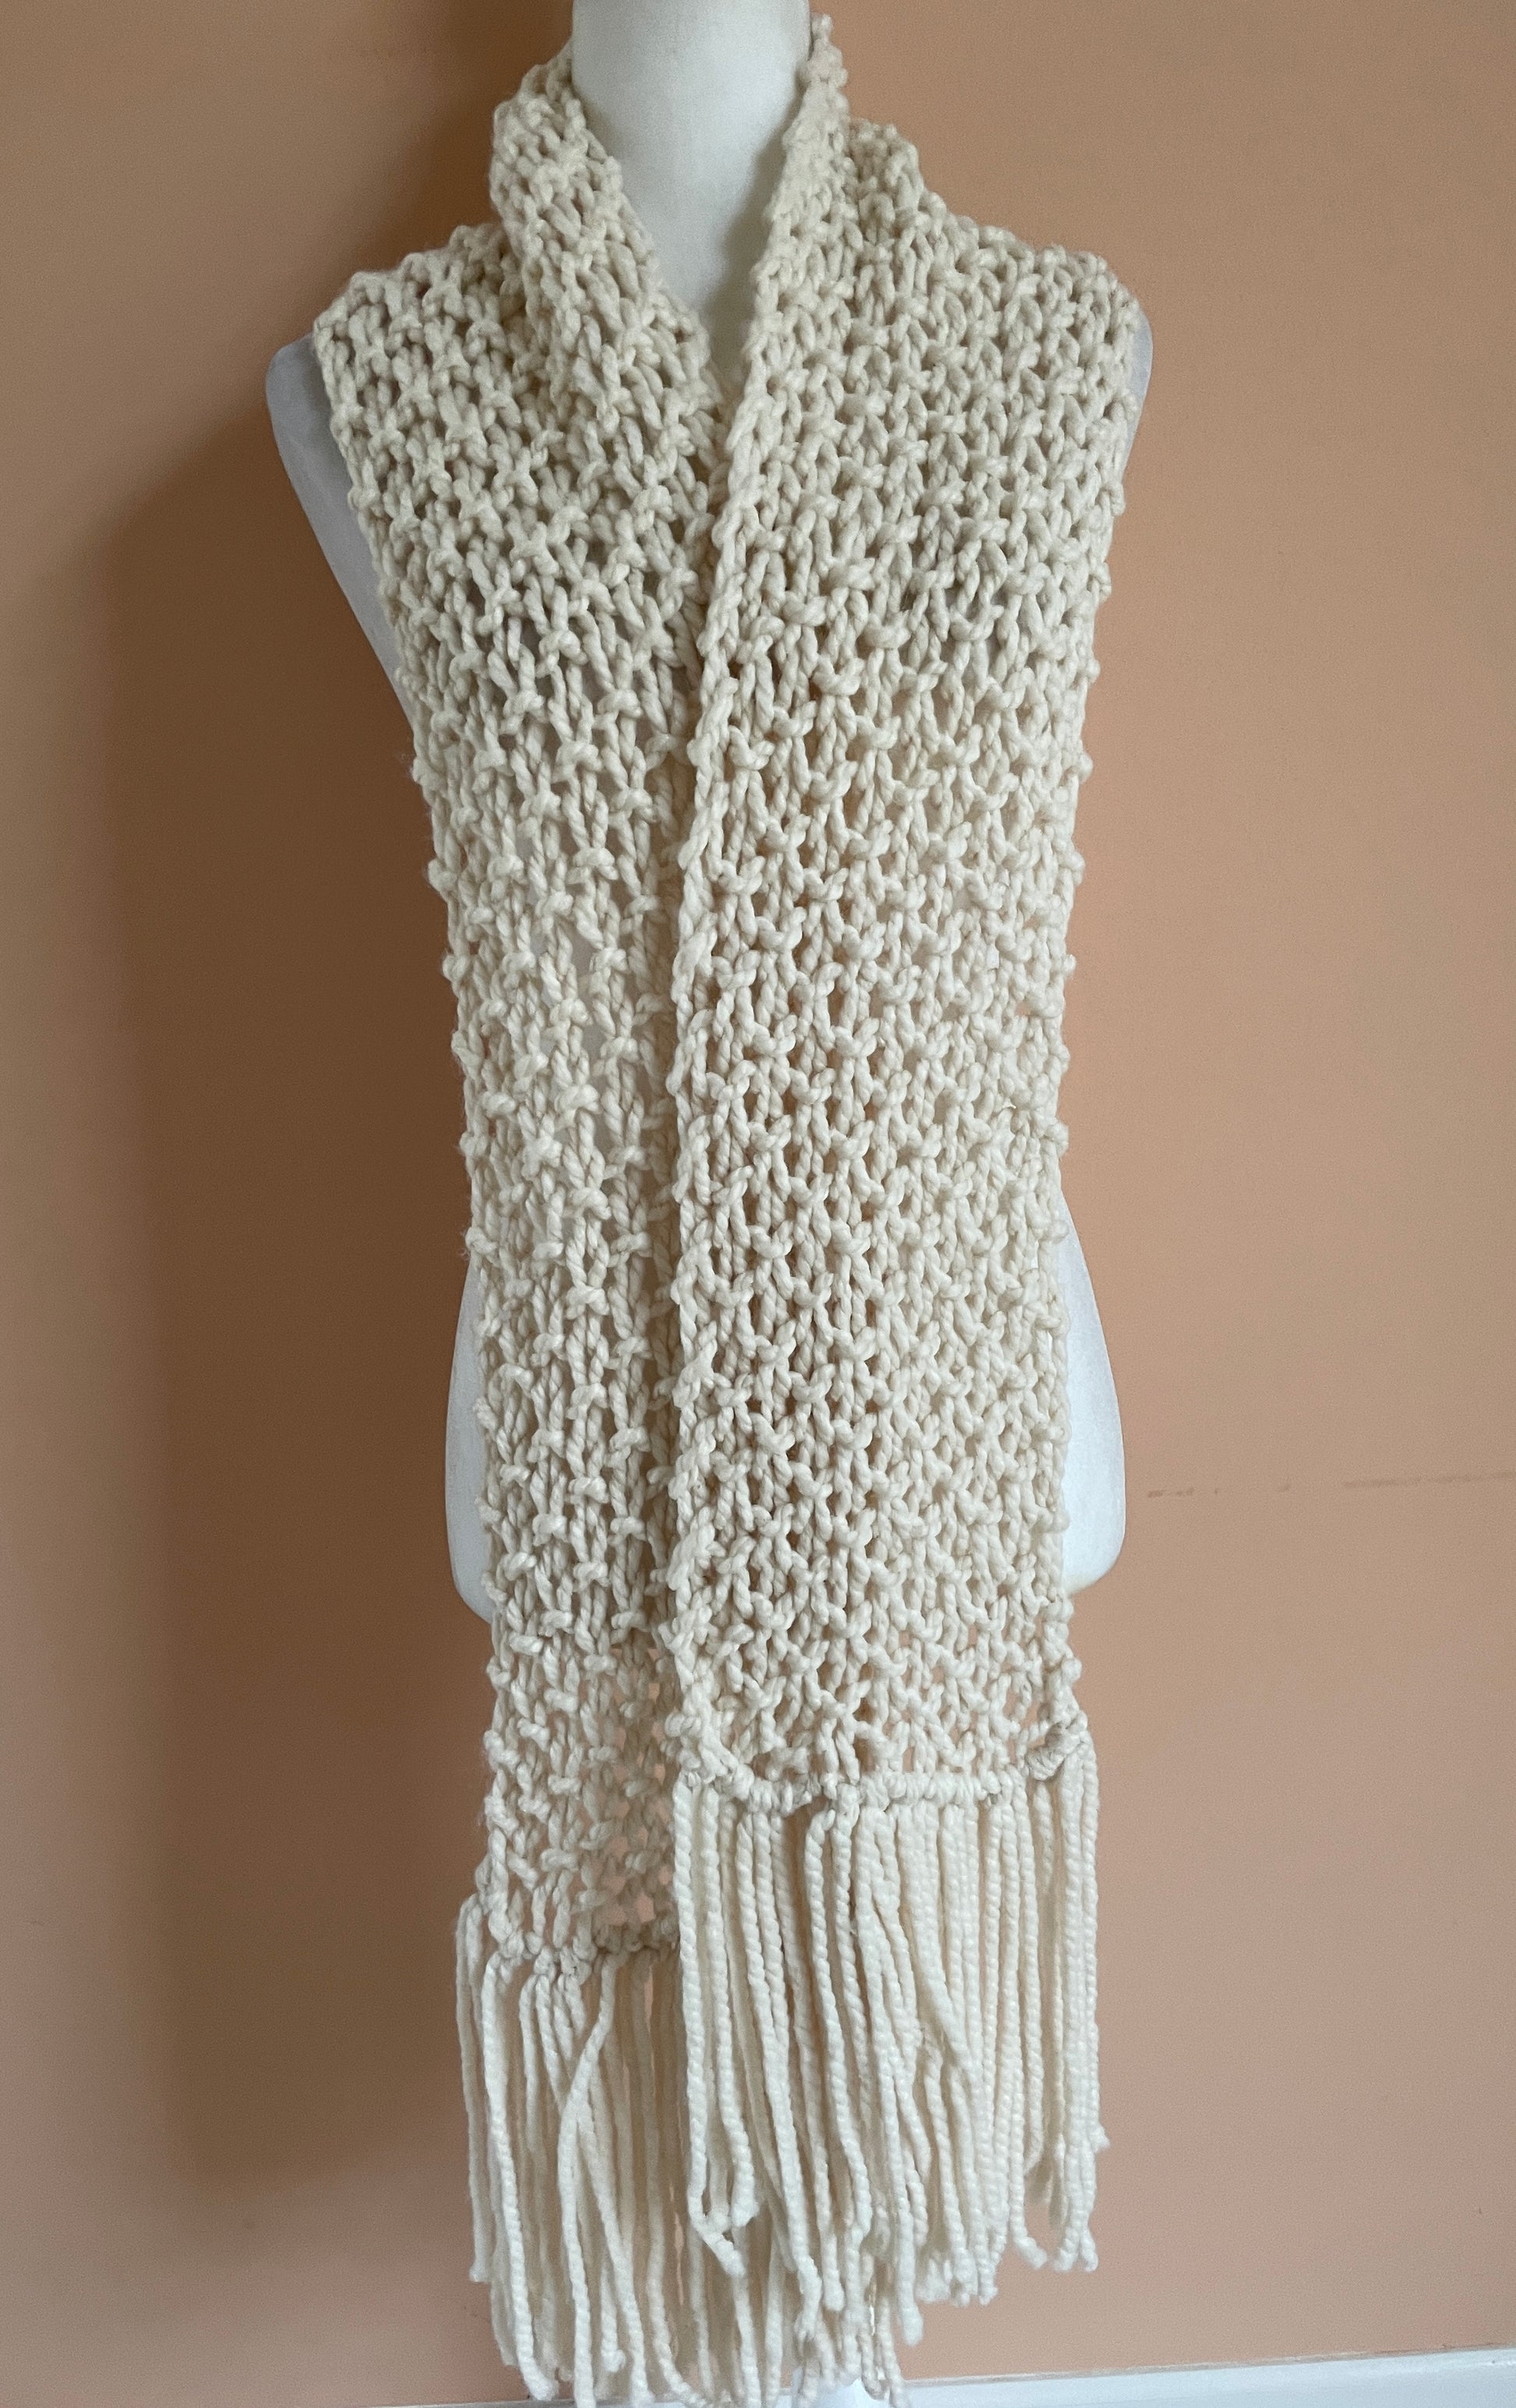  2000s It’s Chilly Hand Knit White Fringed Winter Scarf